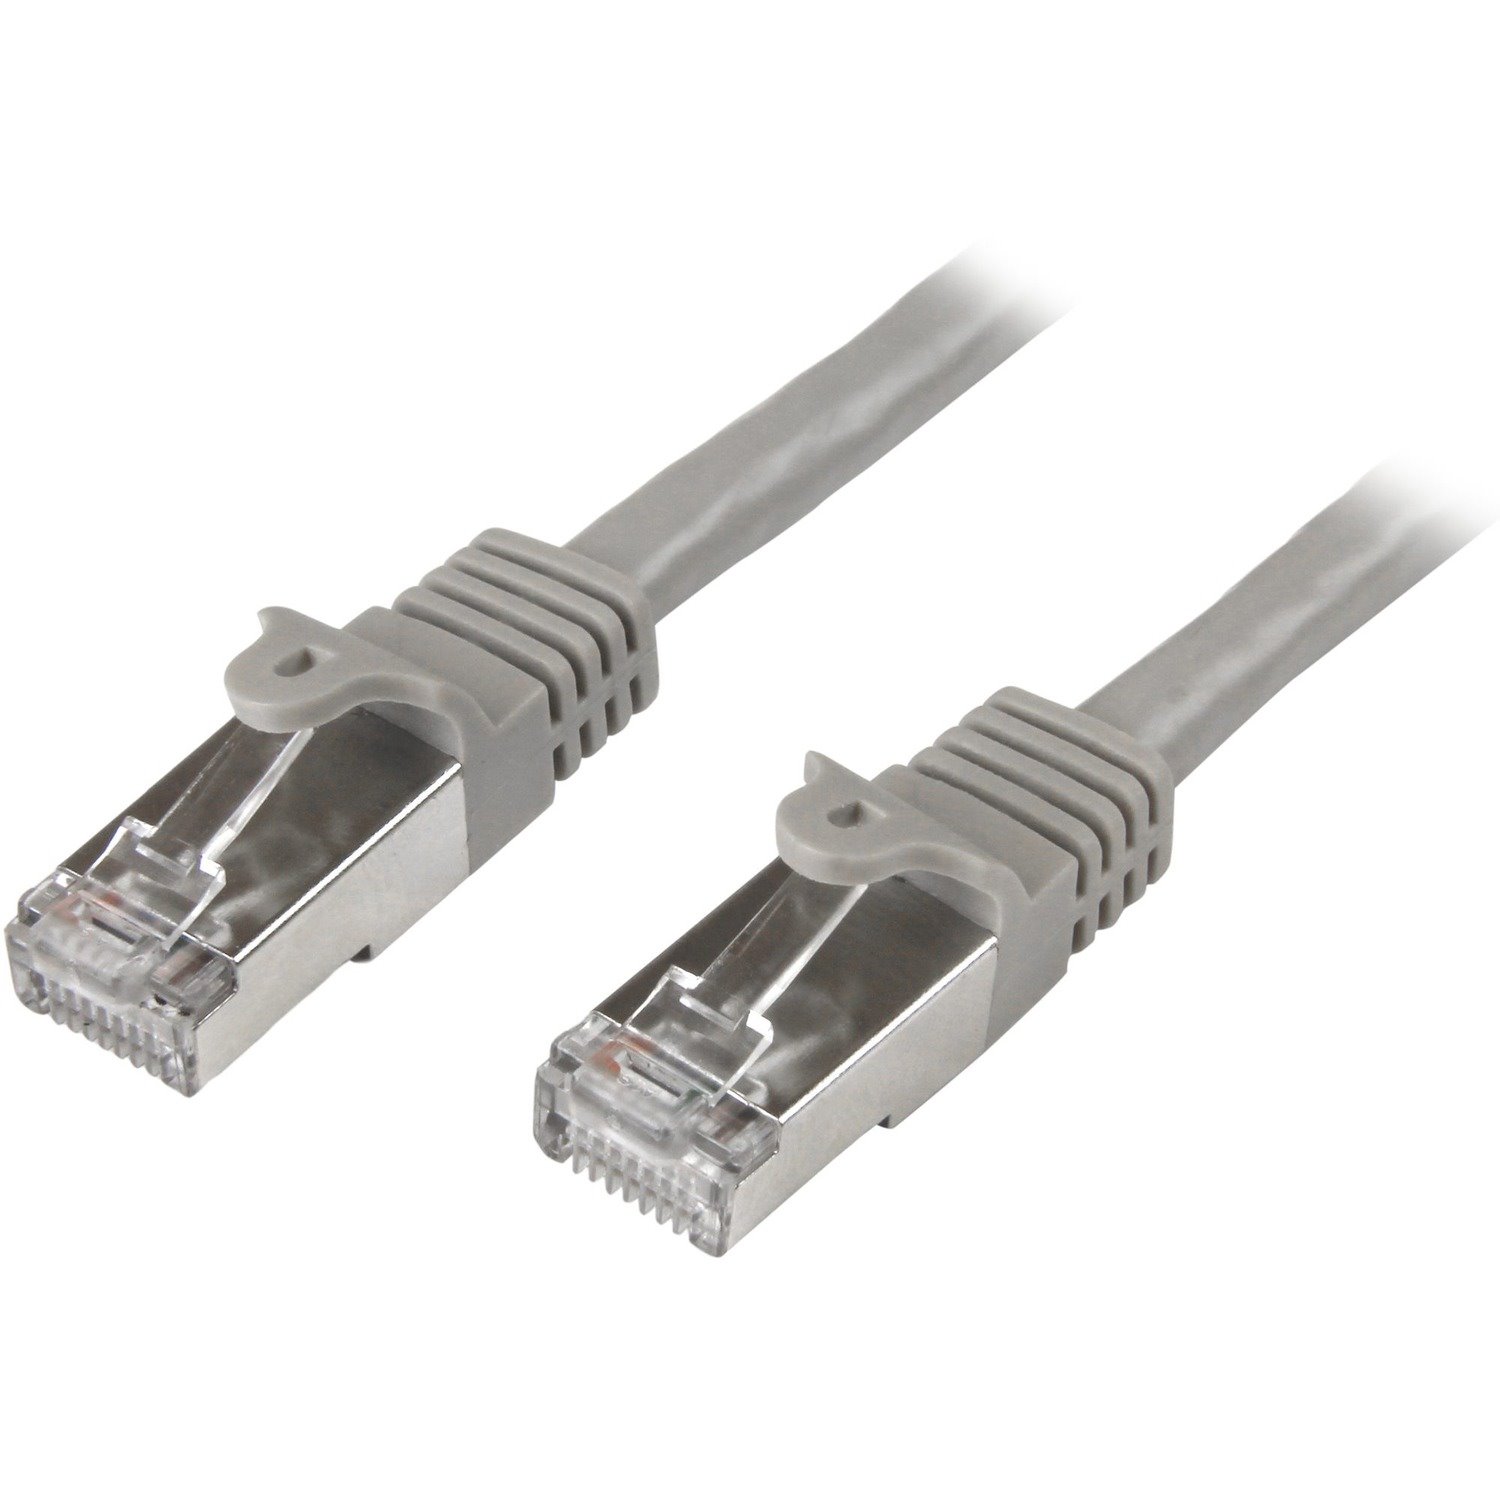 StarTech.com 3m Cat6 Patch Cable - Shielded (SFTP) Snagless Gigabit Network Patch Cable - Gray Cat 6 Ethernet Patch Lead